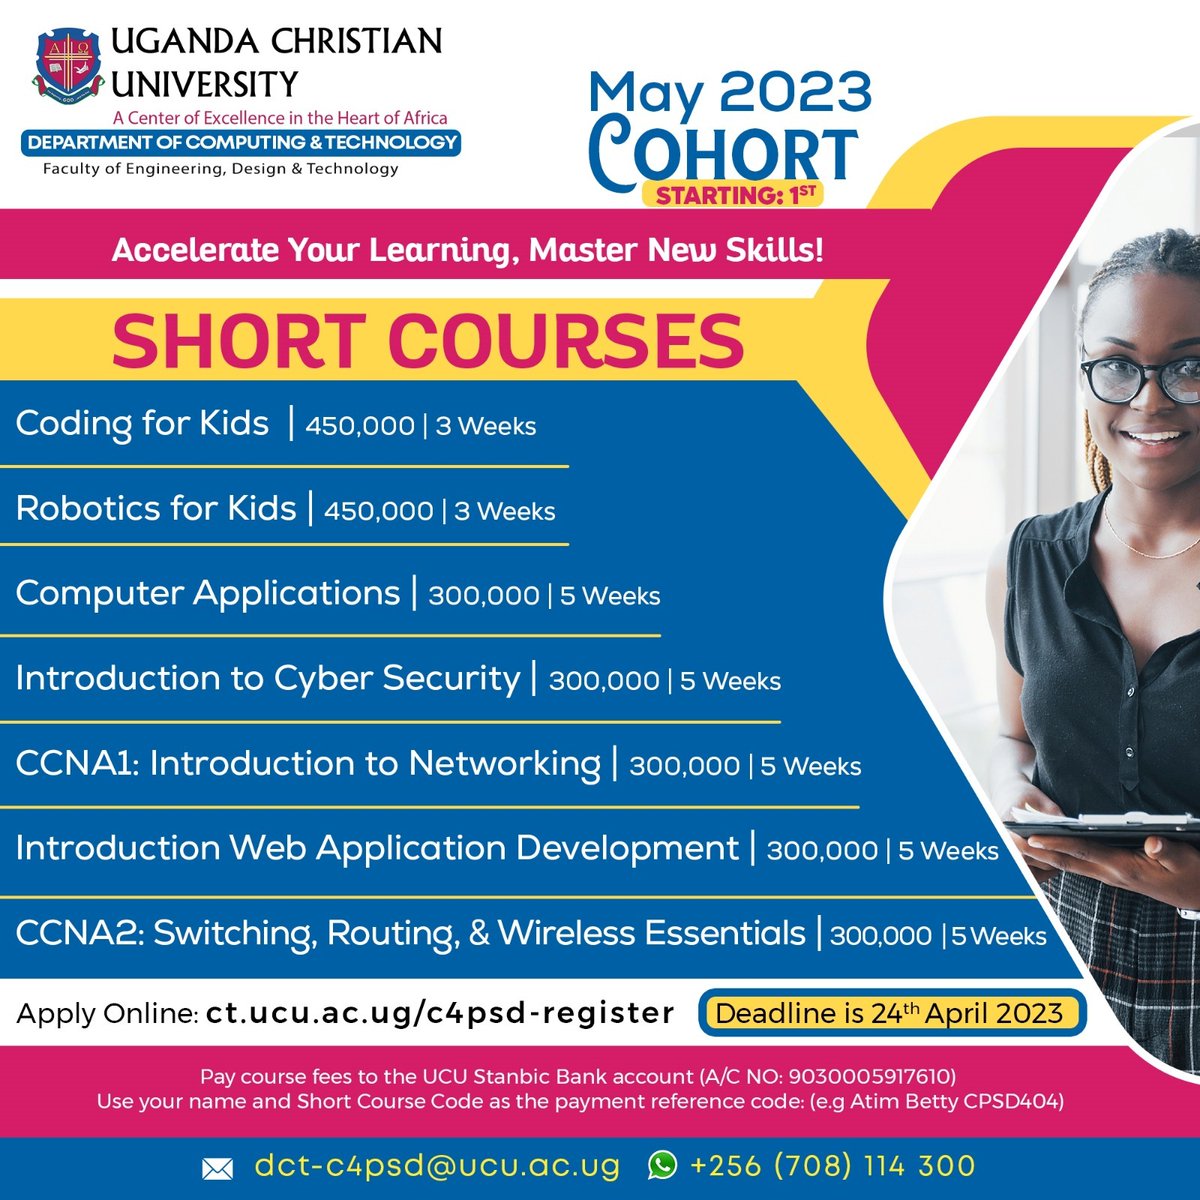 Are you out there like Sarah? Don't let missed opportunities hold you back. The deadline for Short courses is 24th April 2023. 
The best time to invest in yourself is now ✨️ 
Apply for our short courses now at ct.ucu.ac.ug/c4psd-register

#Career #Apply2UCU #ShortCourses